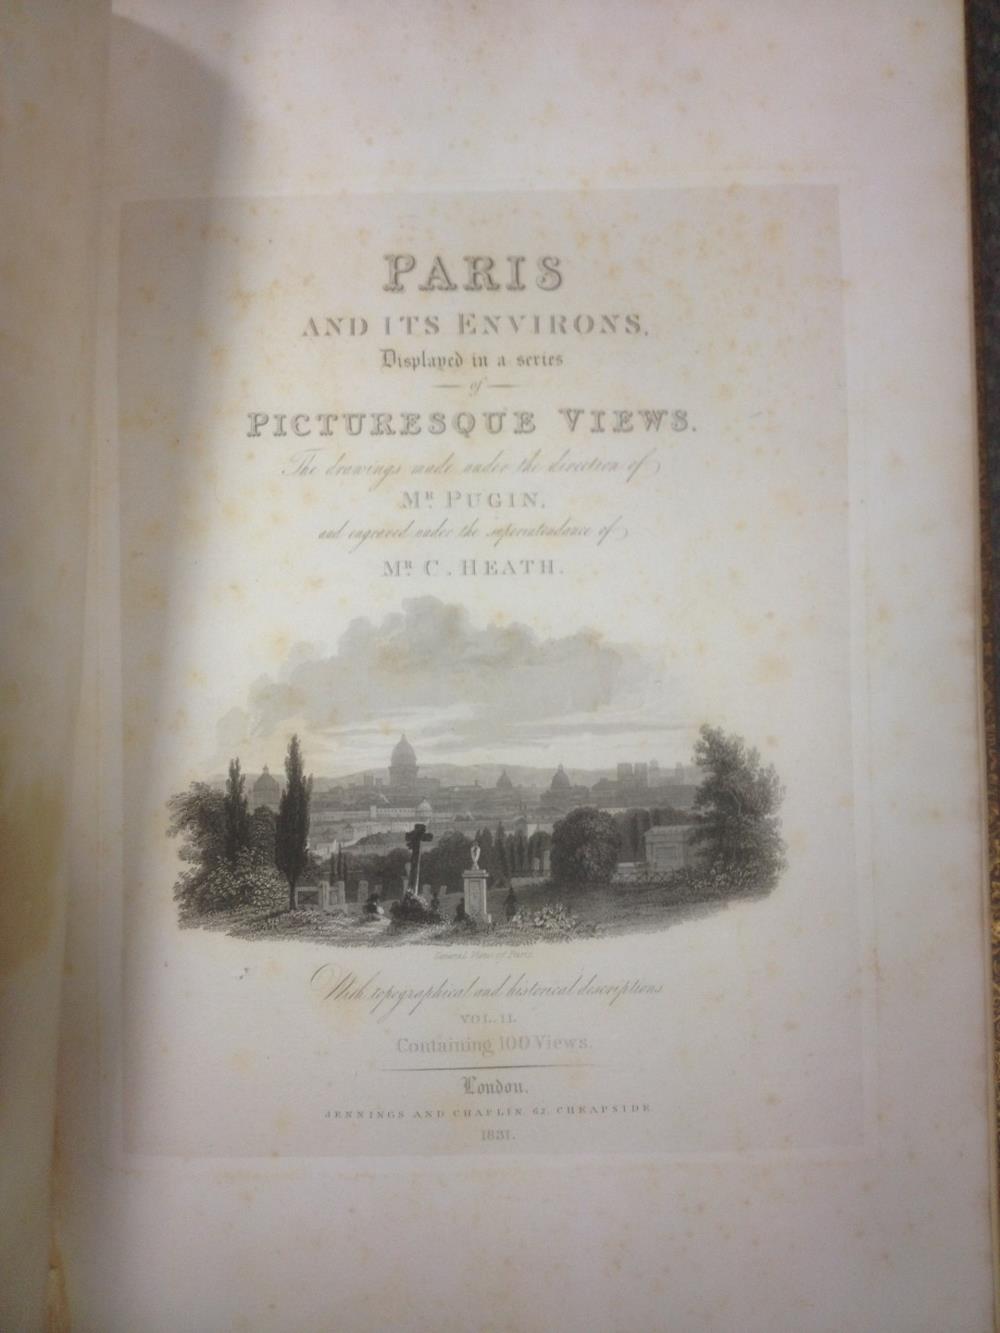 PUGIN & HEATH Paris and its Environs, 2 volumes London 1831, 4to, large paper edition, mounted India - Image 5 of 6